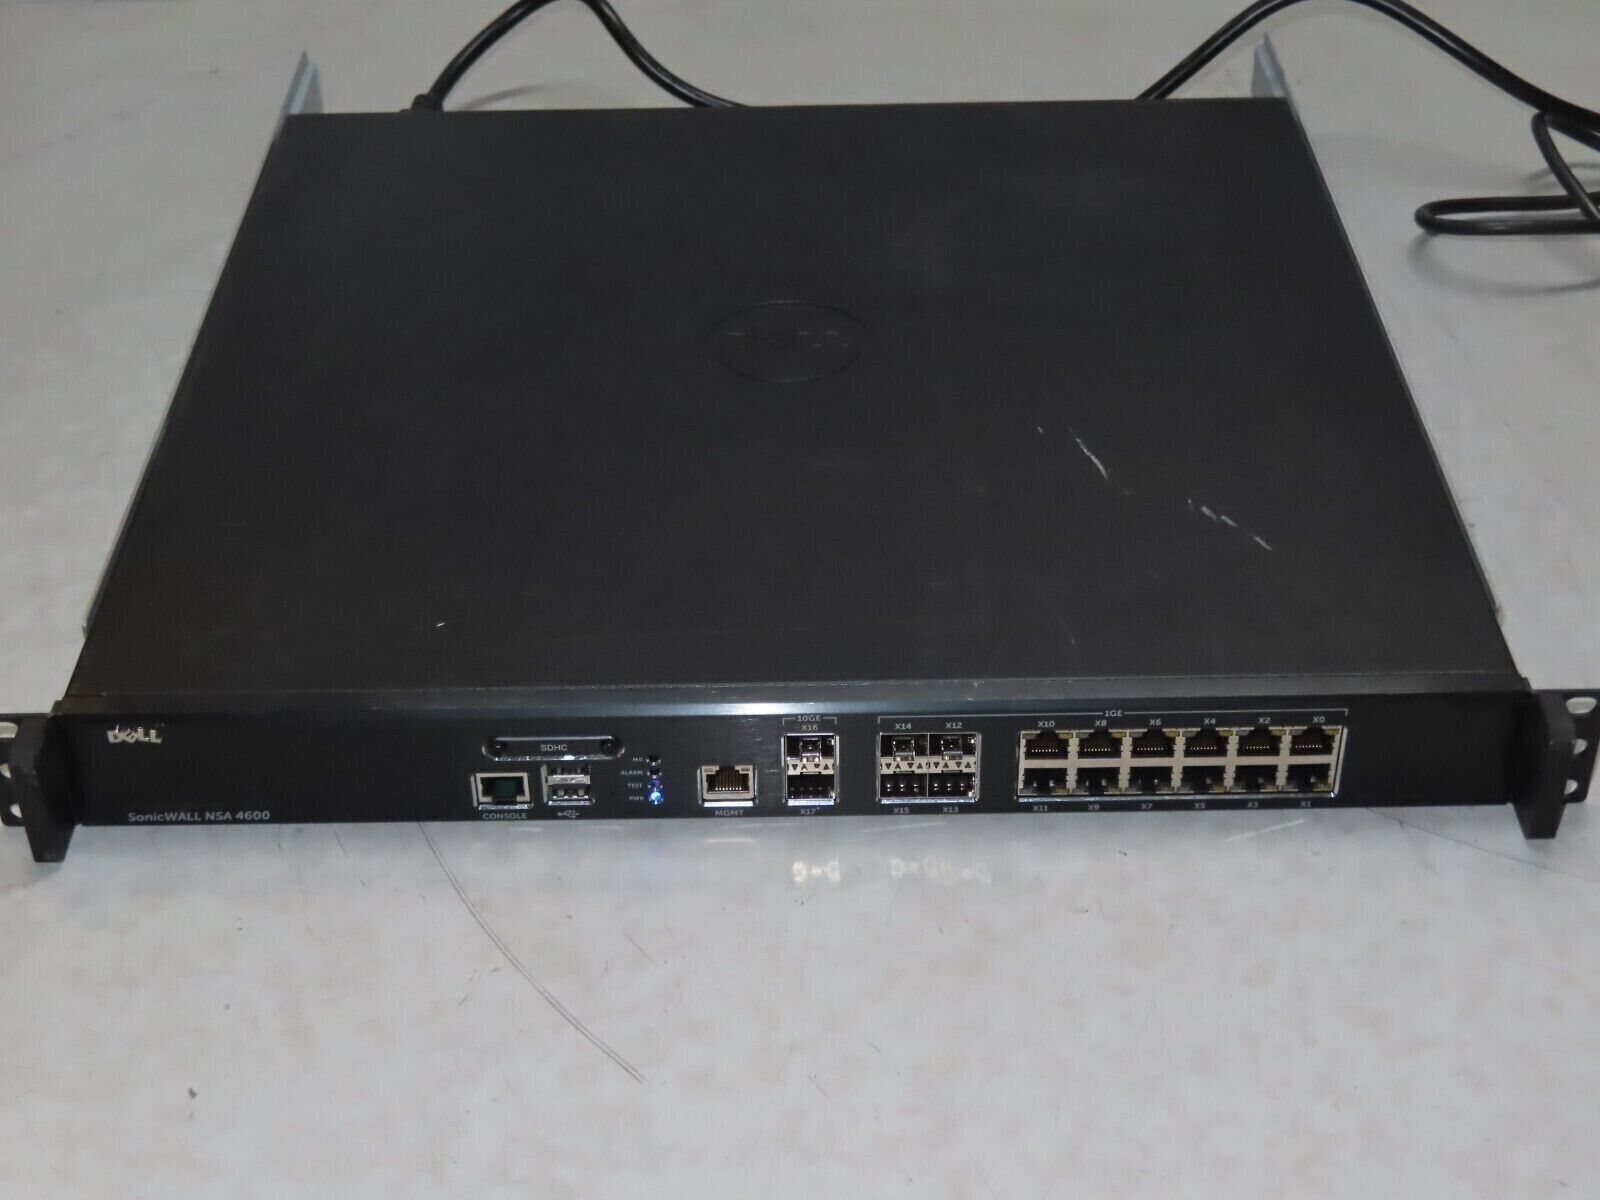 Dell SonicWall NSA 4600 Firewall 12 Port Network Security Appliance 1RK26-0A3